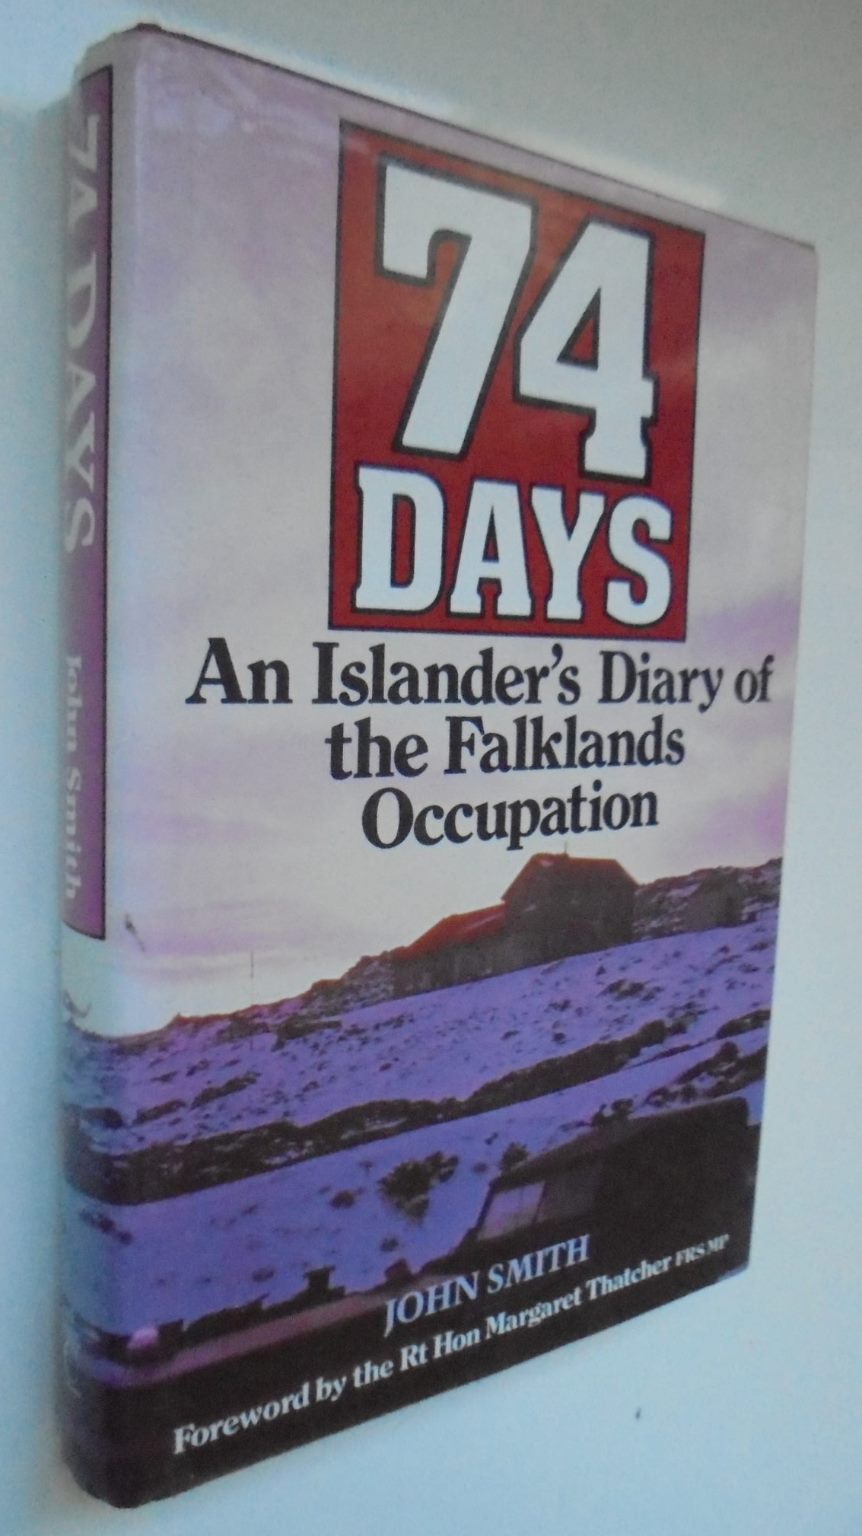 74 days. An islander's diary of the Falklands occupation by John Smith